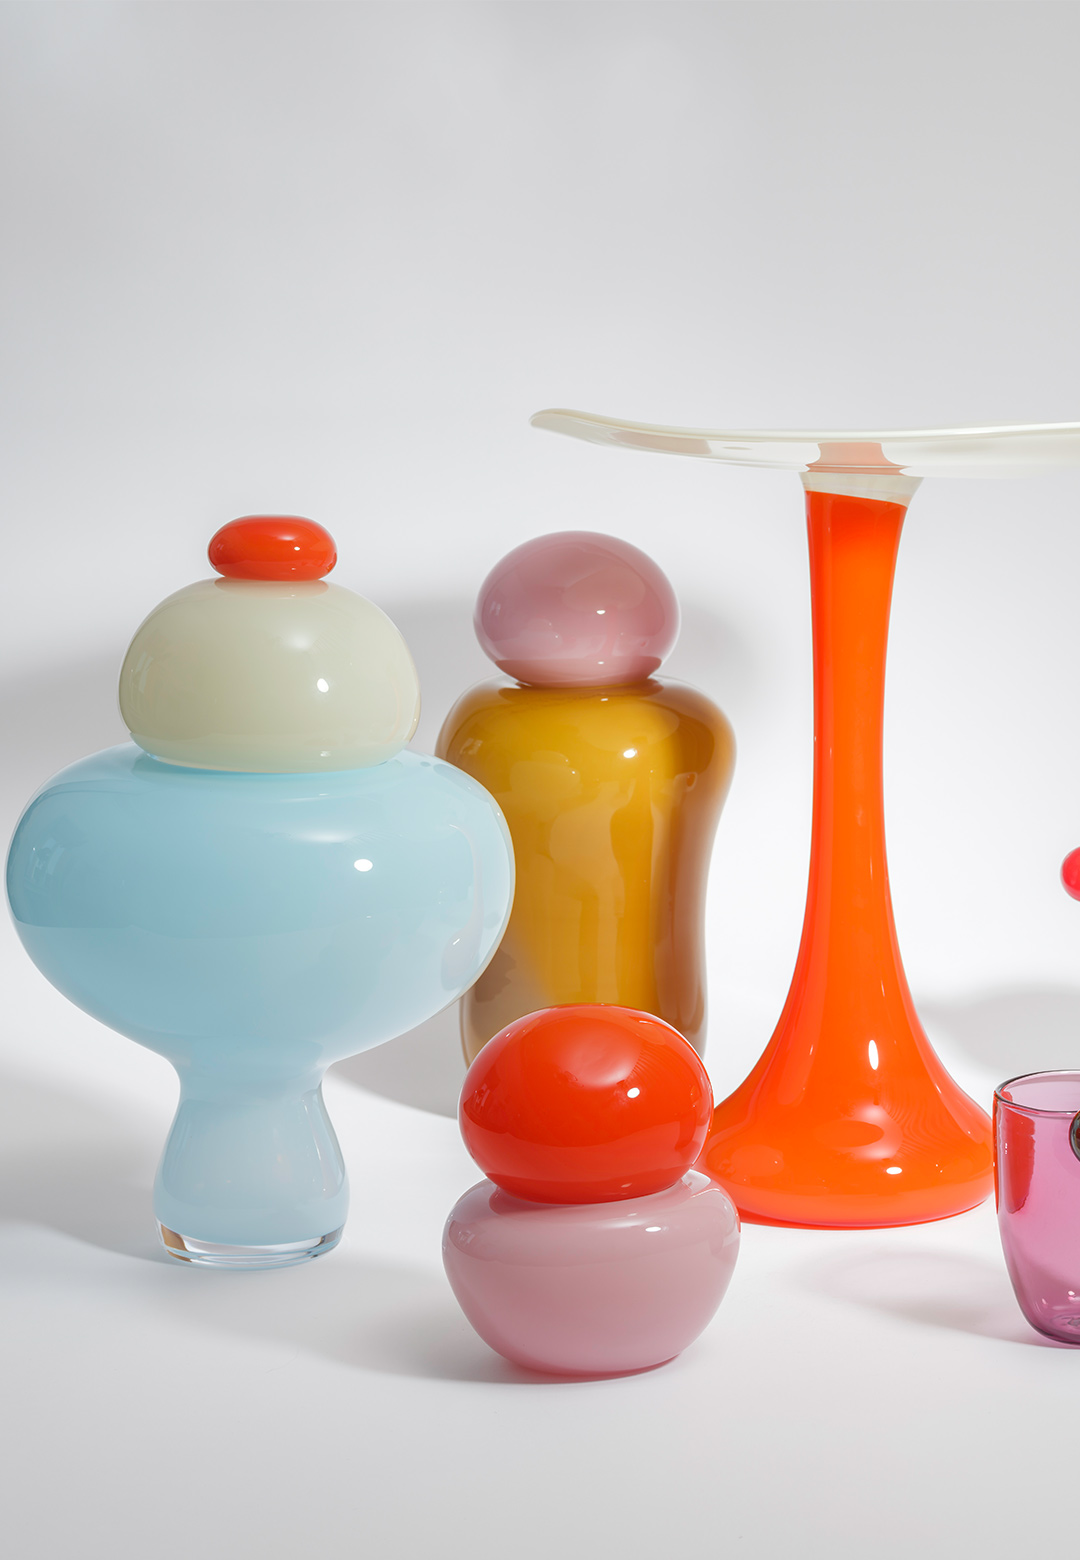 Helle Mardahl's 'Candy Series One '23' transforms glass into whimsical treats